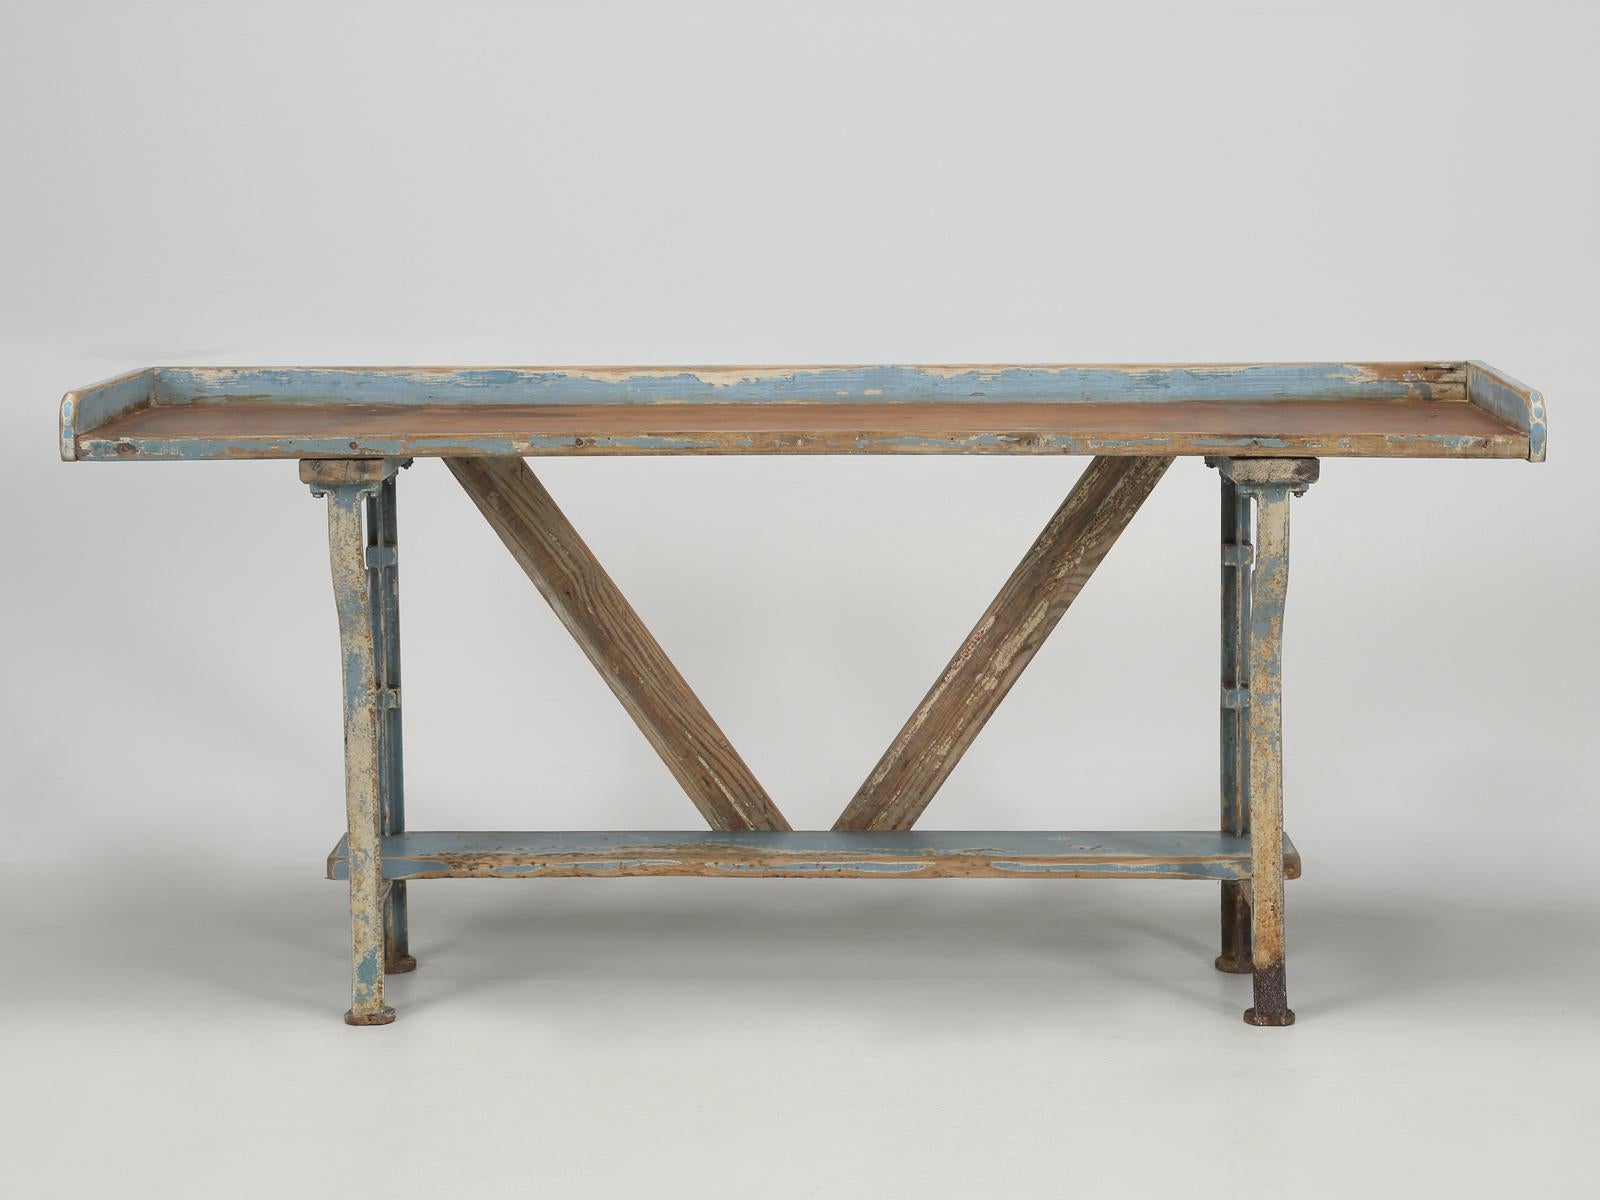 Unique American hand-made original blue paint work table, garden table, craft table or whatever? Our antique American work table is a bit unusual, in that it actually has a bit of style, where normally you see just a combination of straight lines,